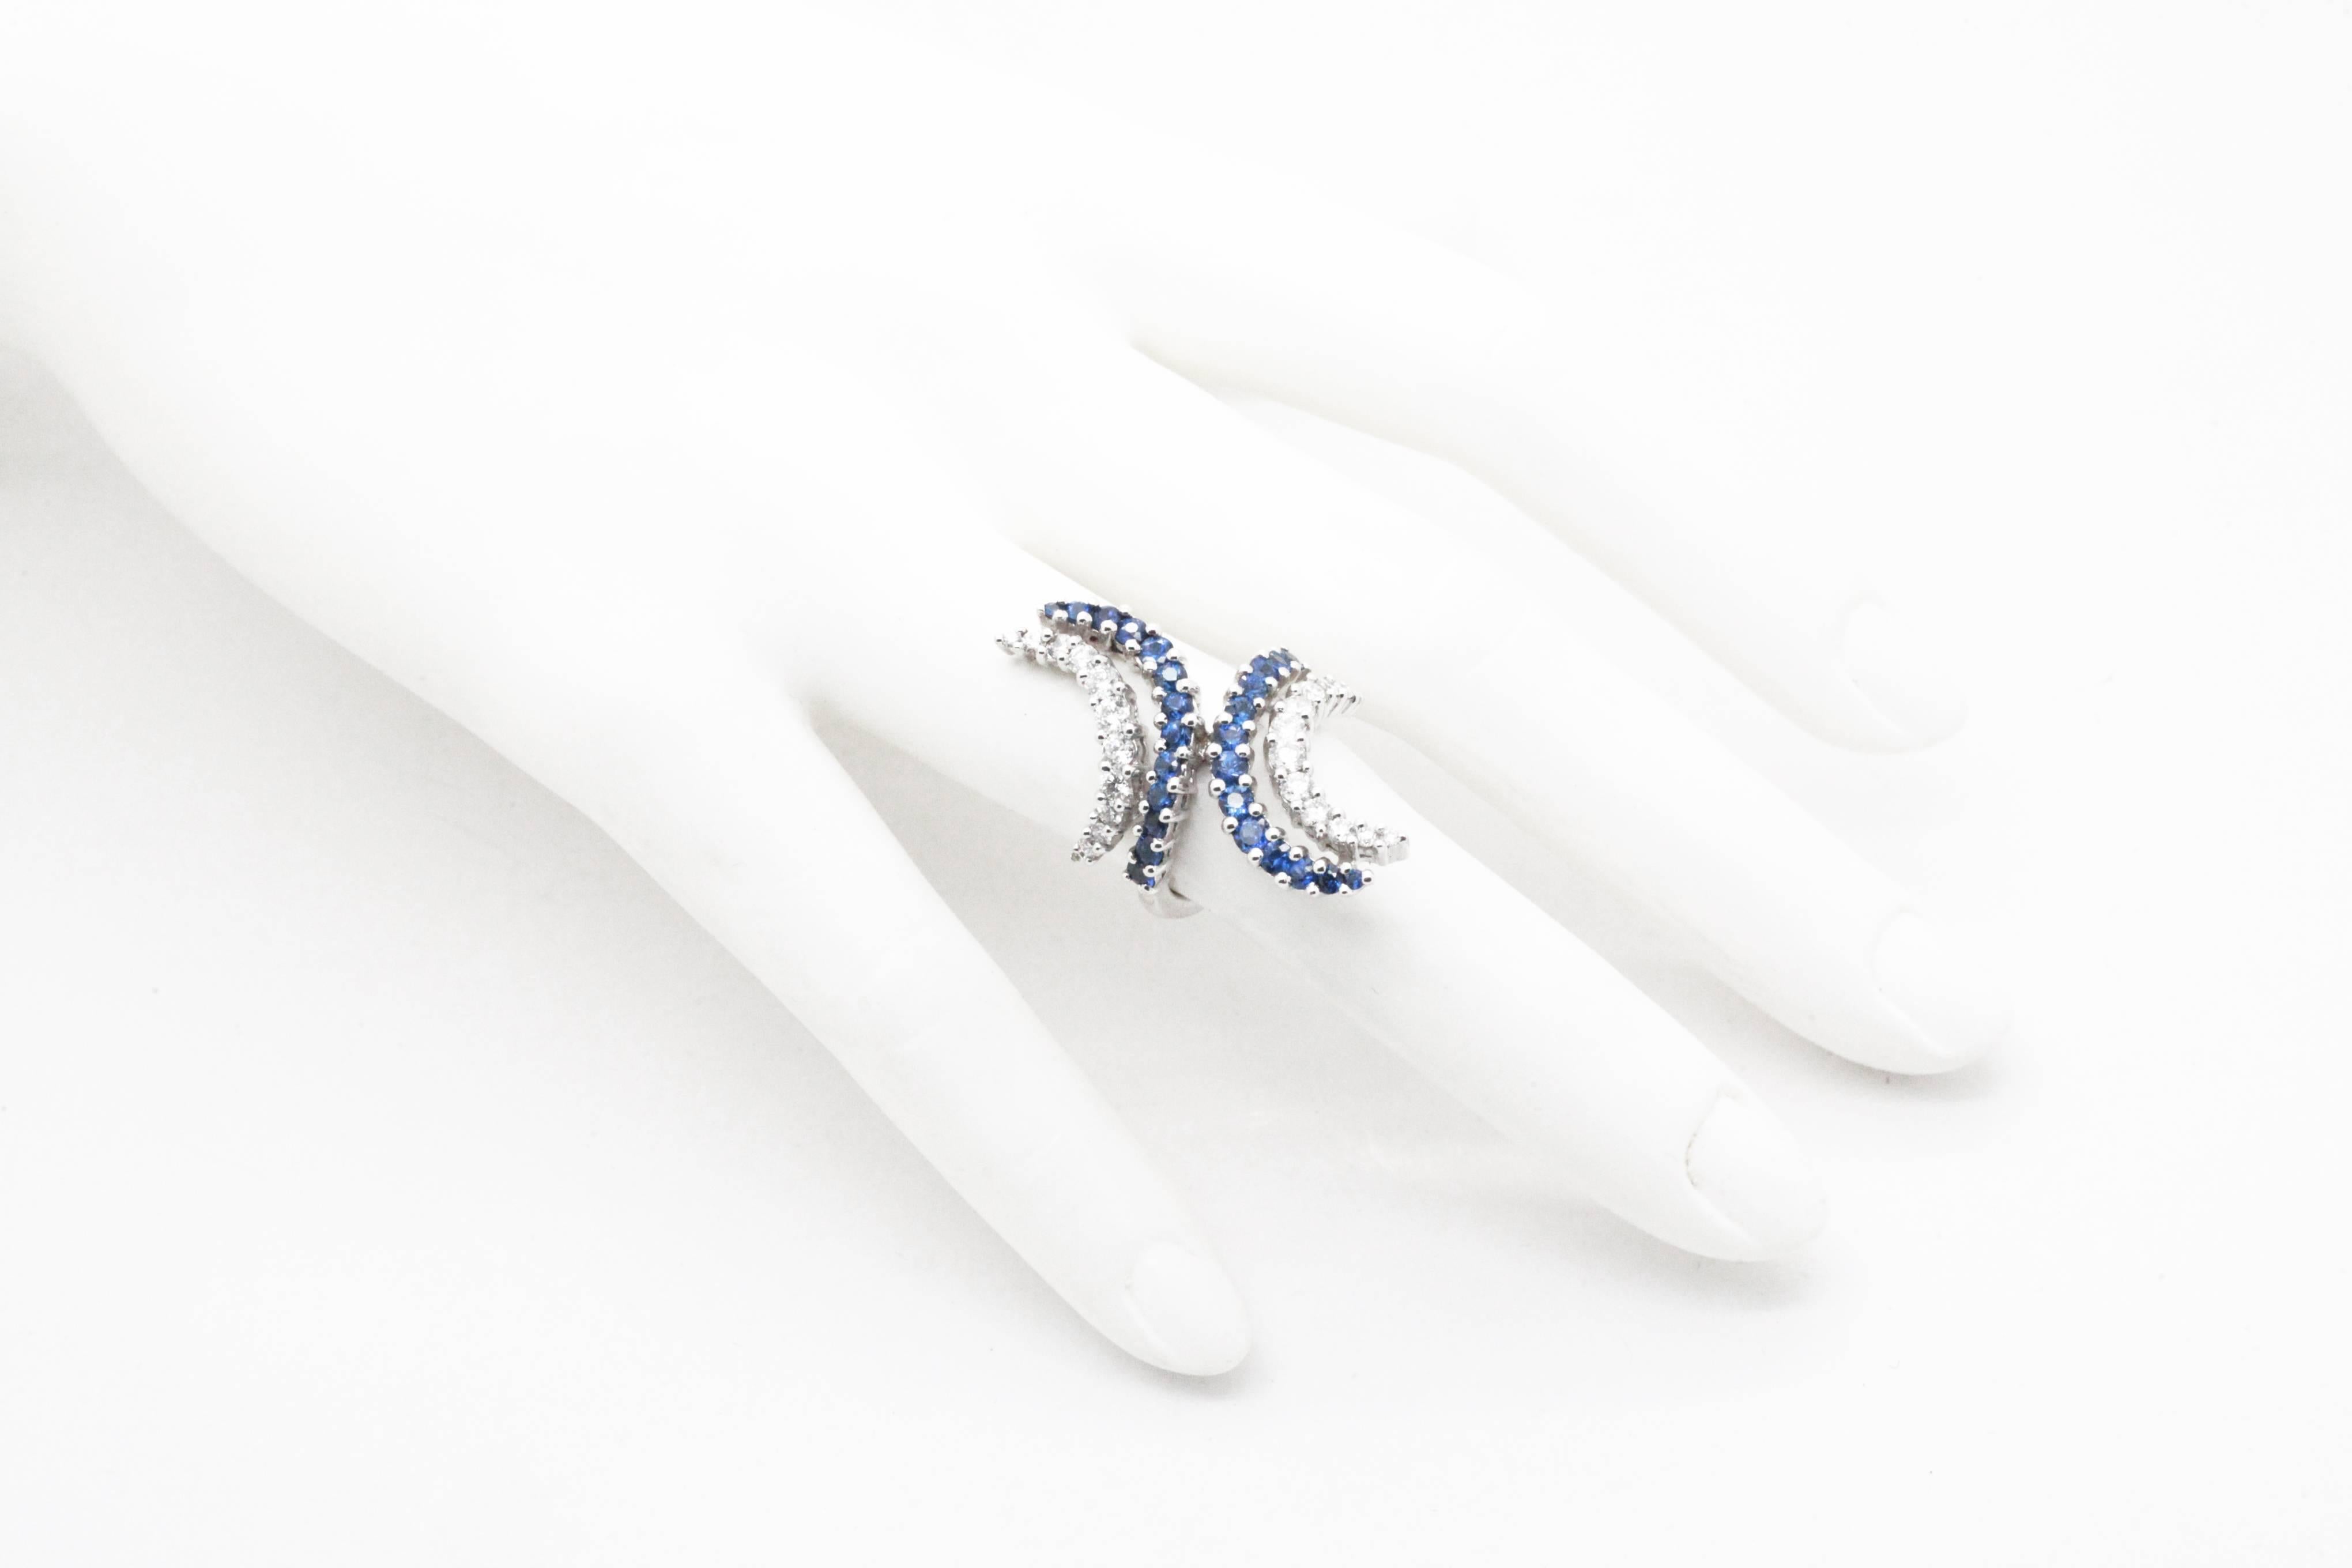 Women's Ferrucci Diamonds and Blue Sapphires 18 Karat White Gold Ring Made in Italy